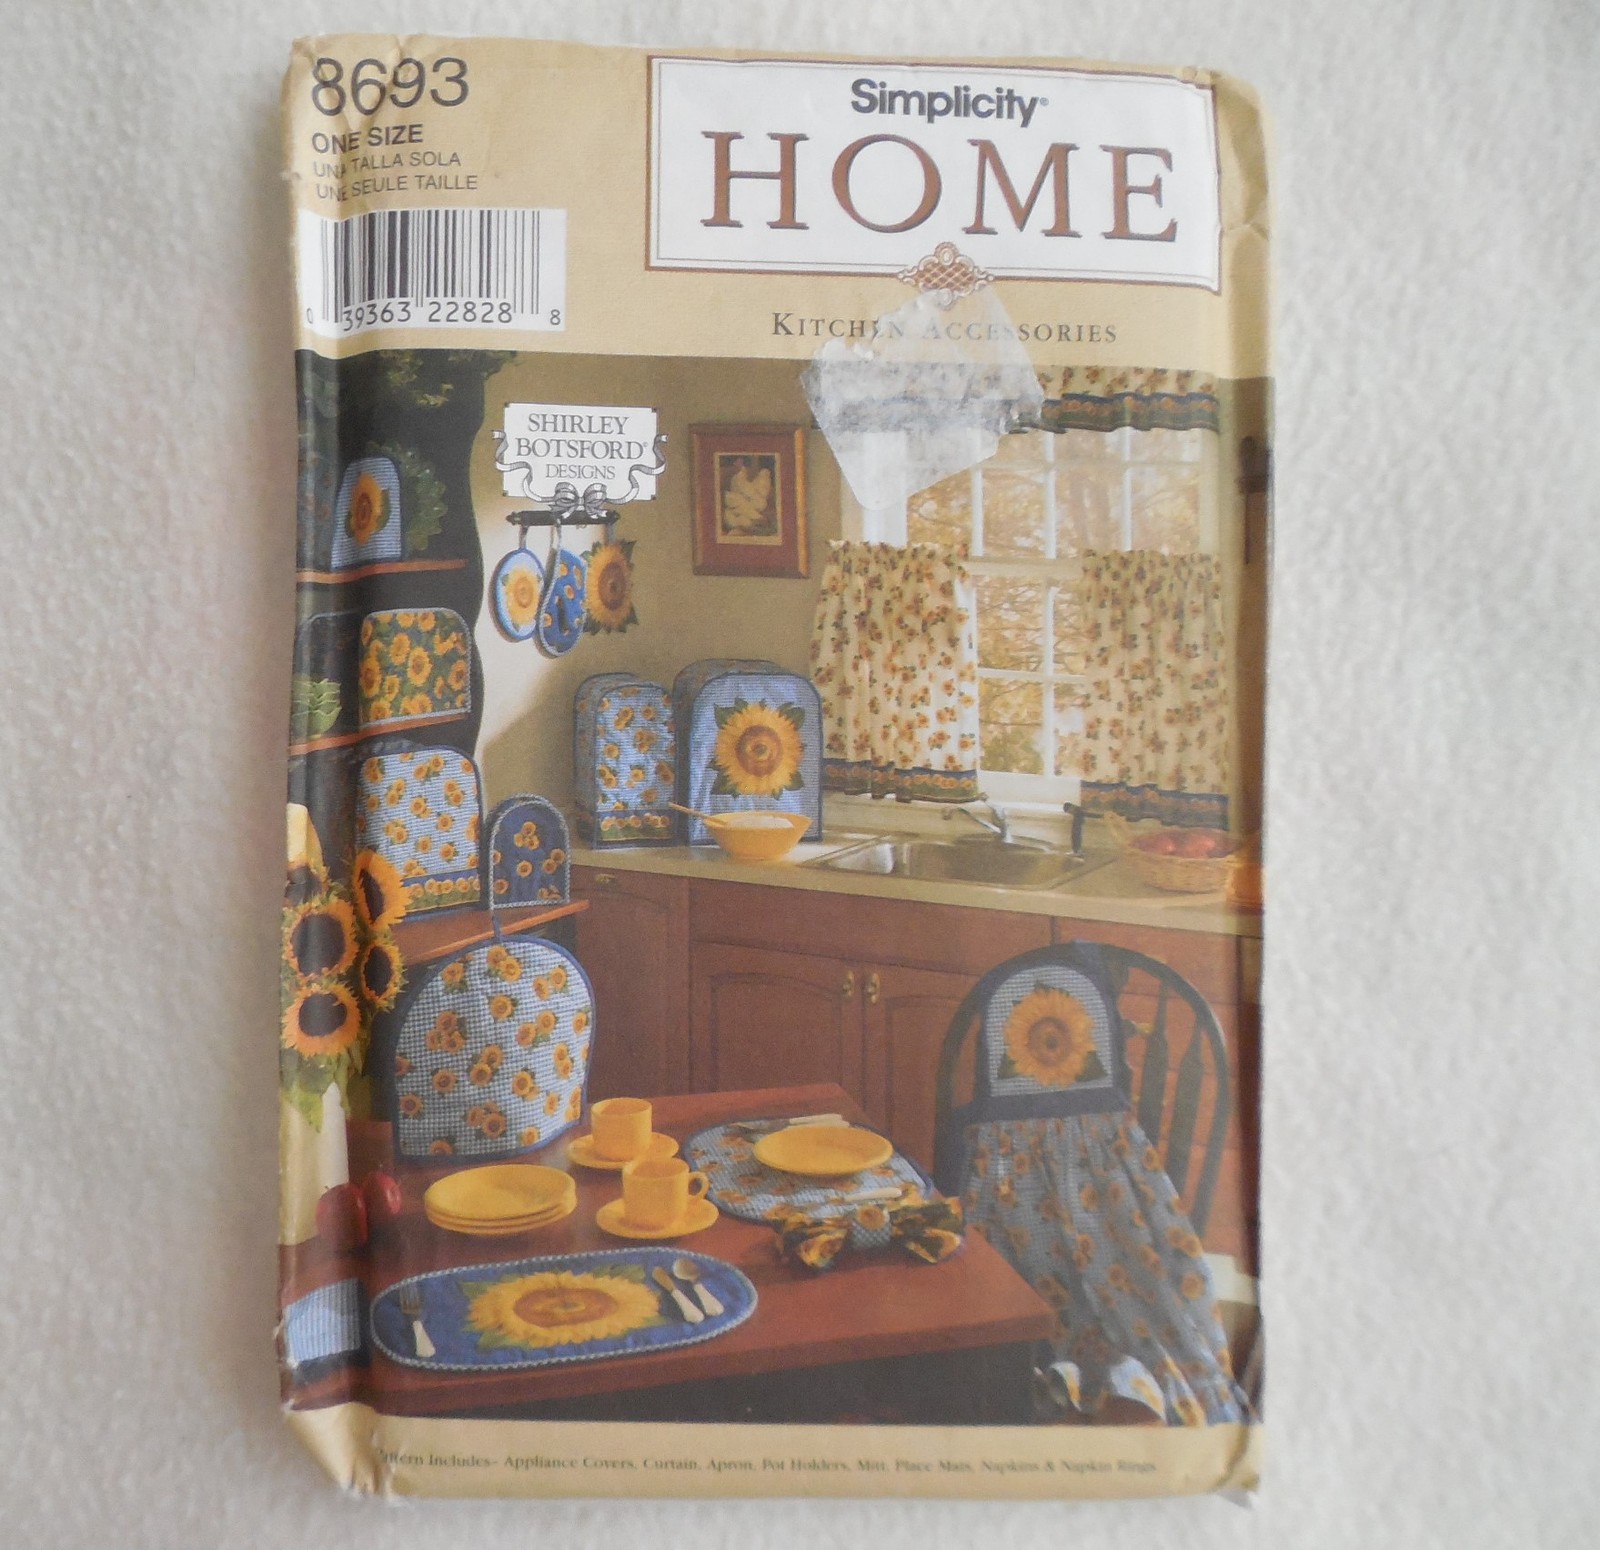 Primary image for Simplicity Home Pattern 8693 Kitchen Accessories sew Sunflowers Shirley Botsford